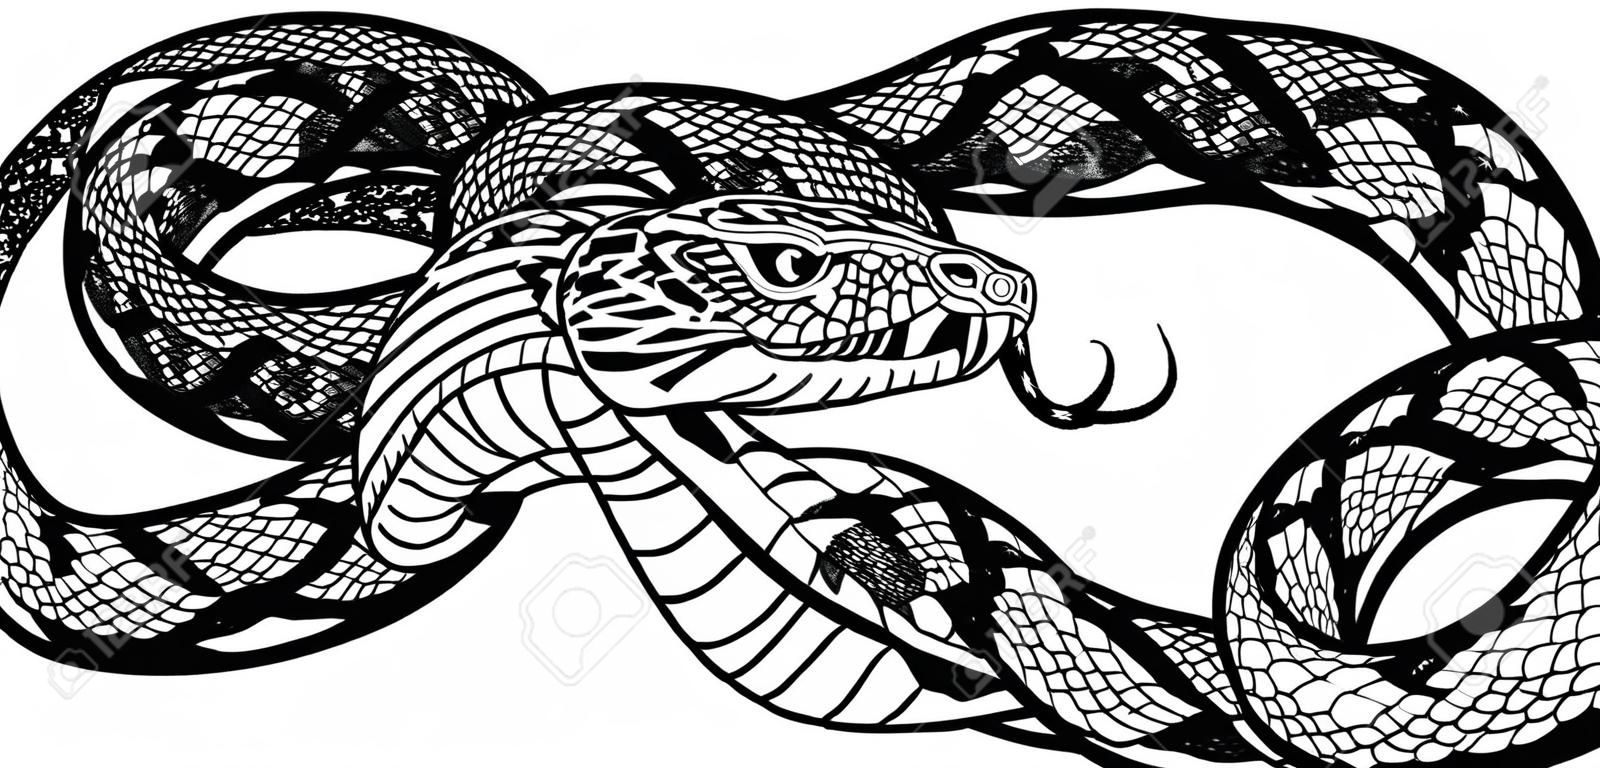 Coiled aggressive snake. Black and white tattoo style vector illustration